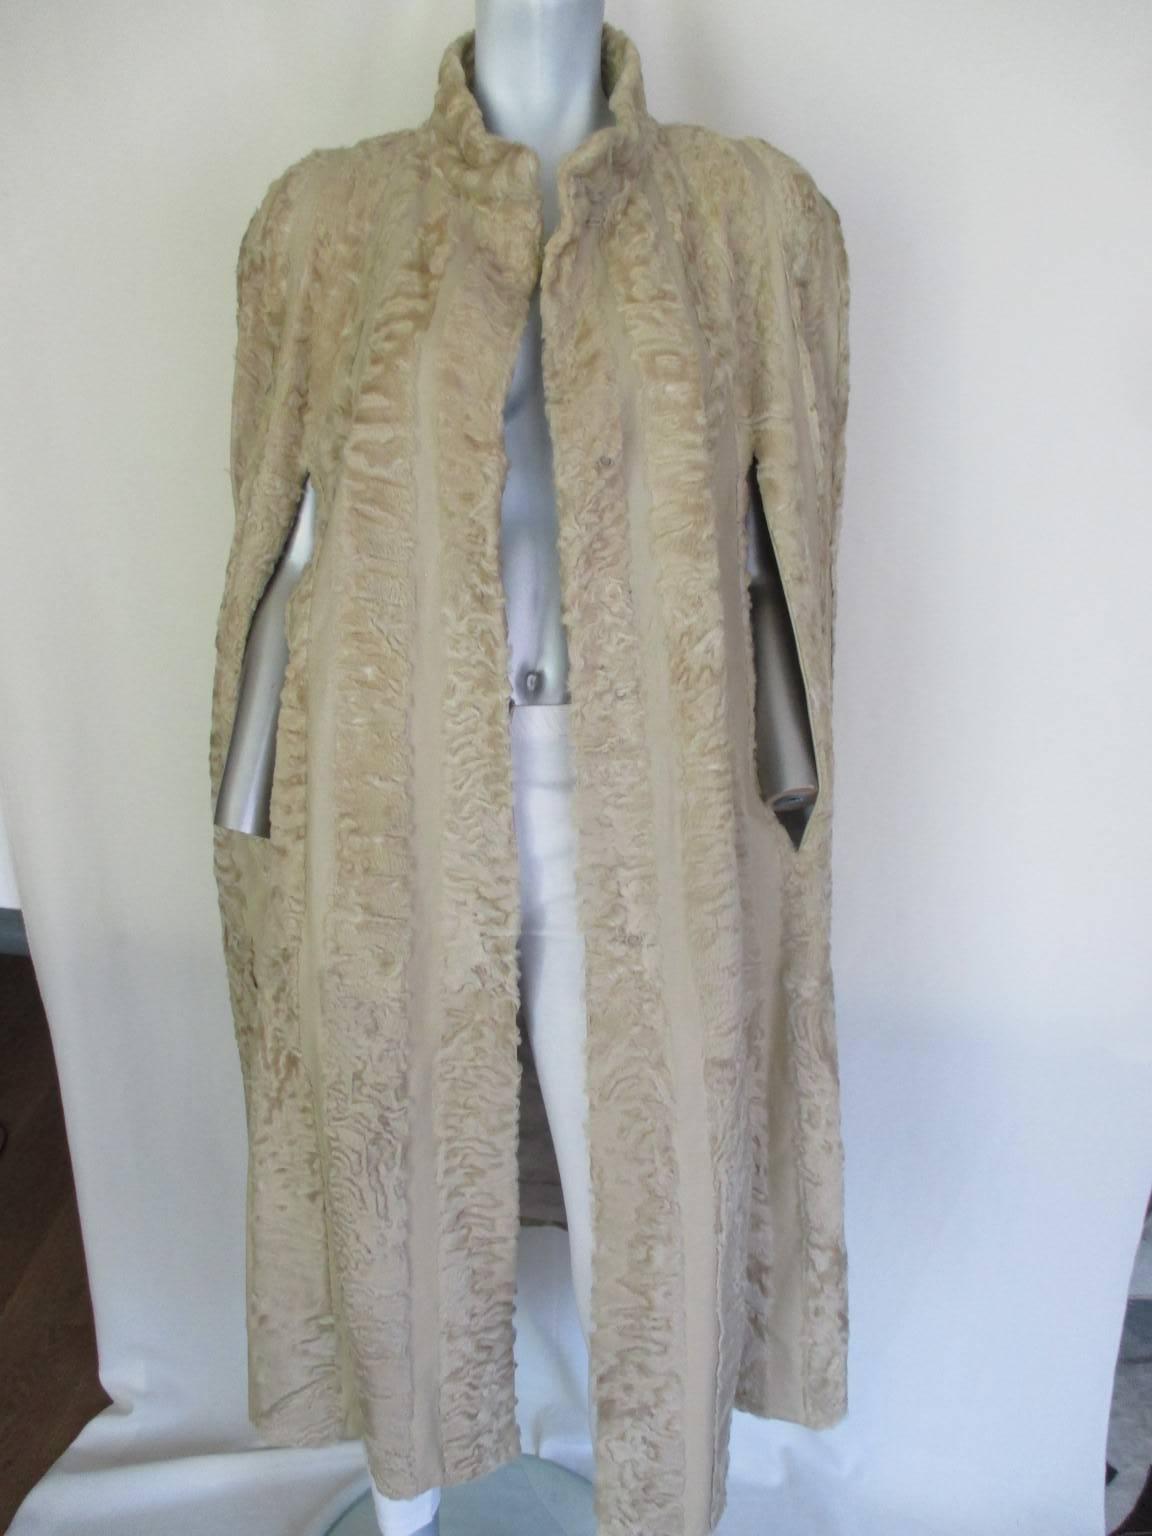 This rare Art deco style vintage Persian Lamb cape with leather details/panels, with 3 closing buttons and one at the collar.
2 pockets are made in the silk lining.
Its in good vintage condition 
Size fits small to medium

Please note that vintage